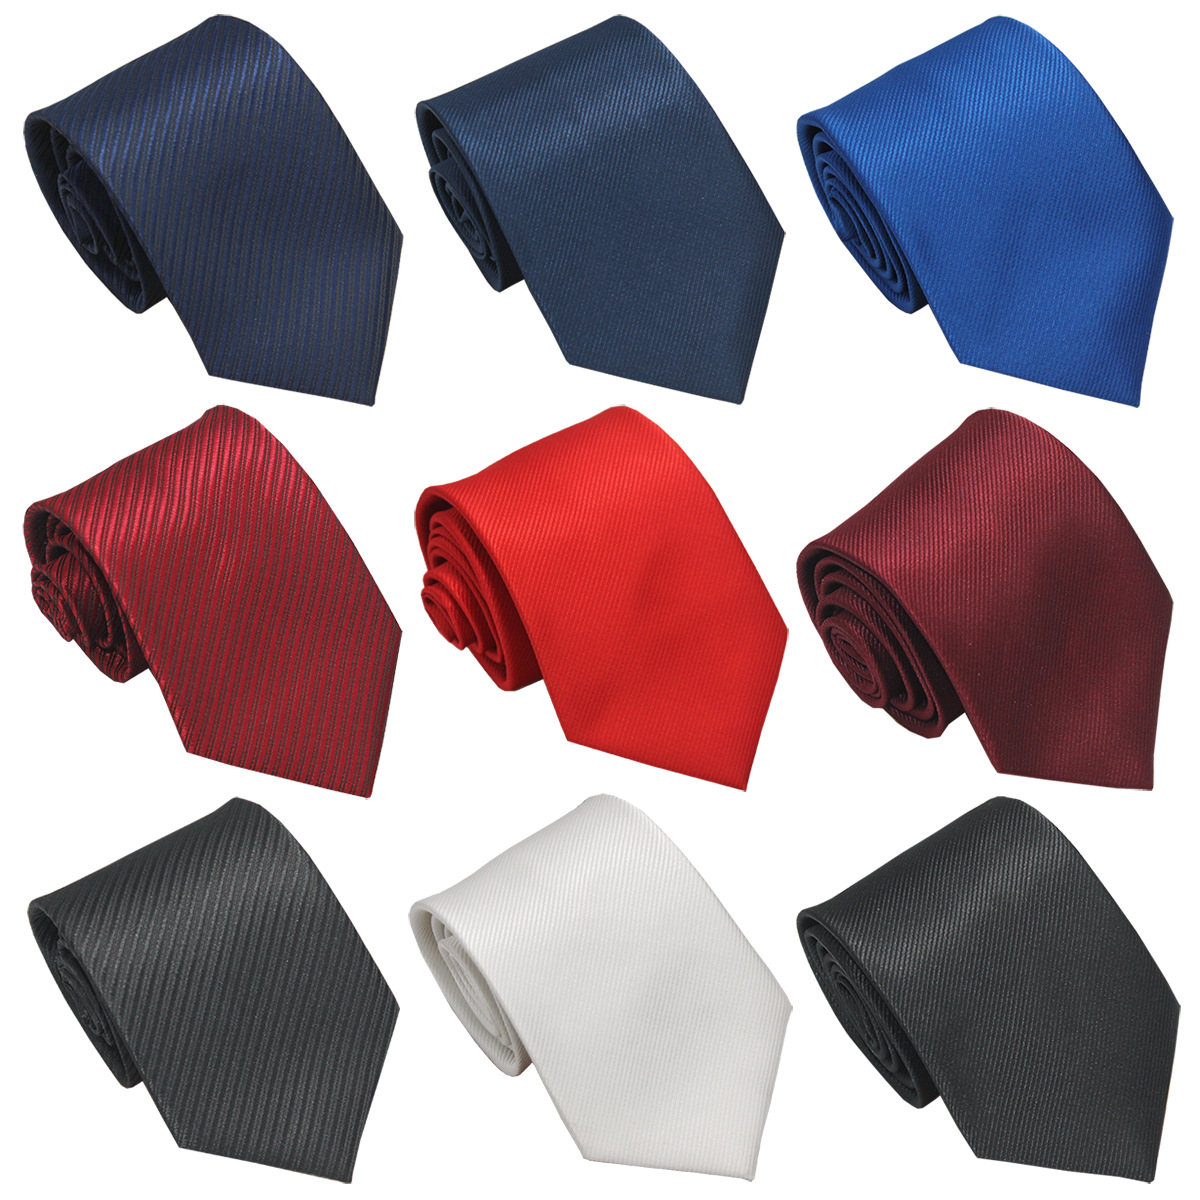 Business Casual Men's Tie Polyester Silk Twill Black Red Suit Accessories 8cm Hand Tie Solid Color Tie